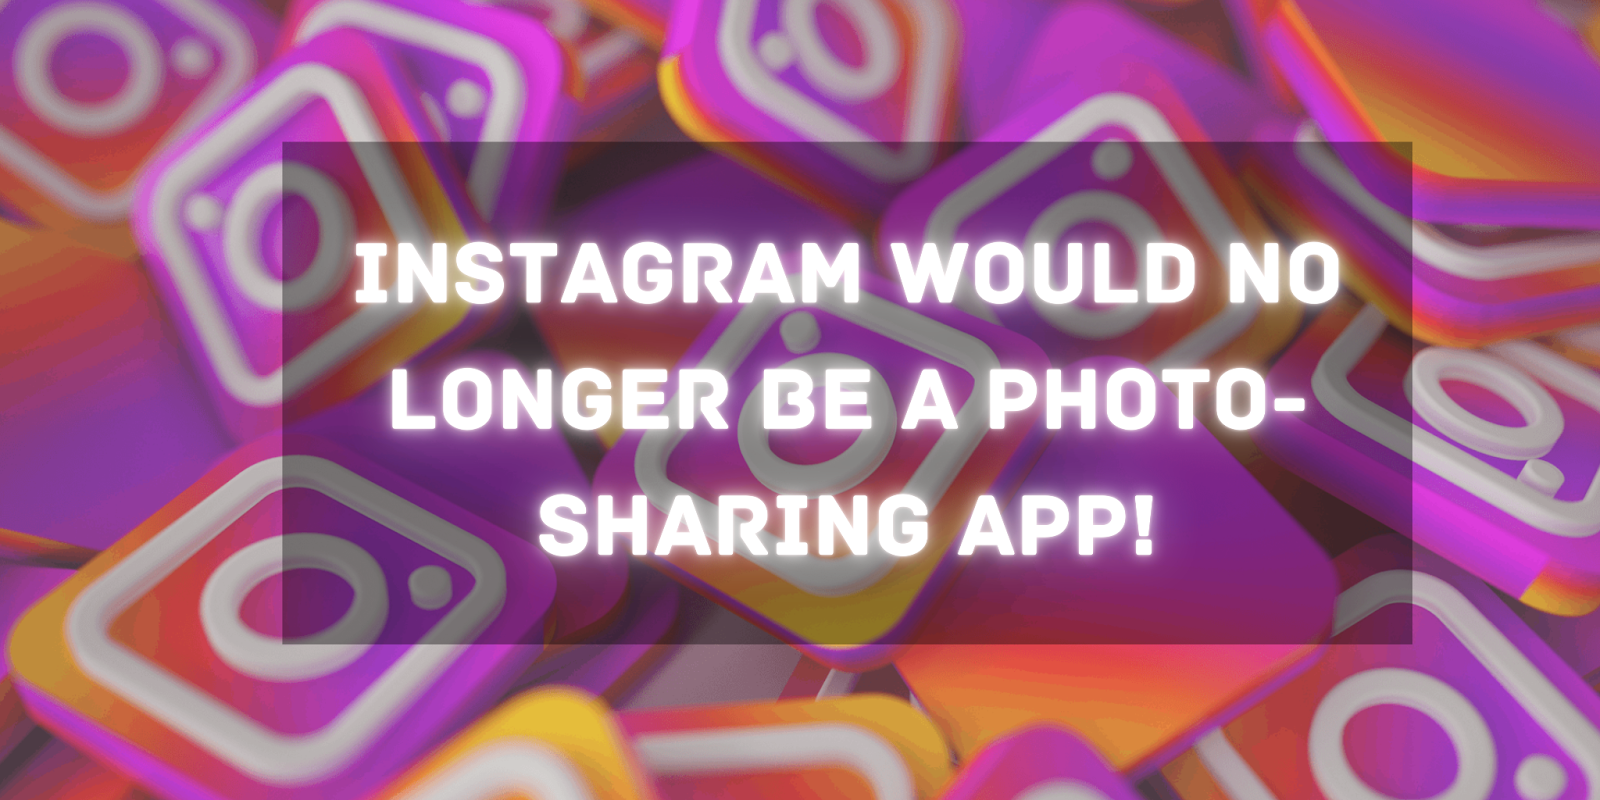 Instagram-Would-No-Longer-Be-A-Photo-Sharing-App!